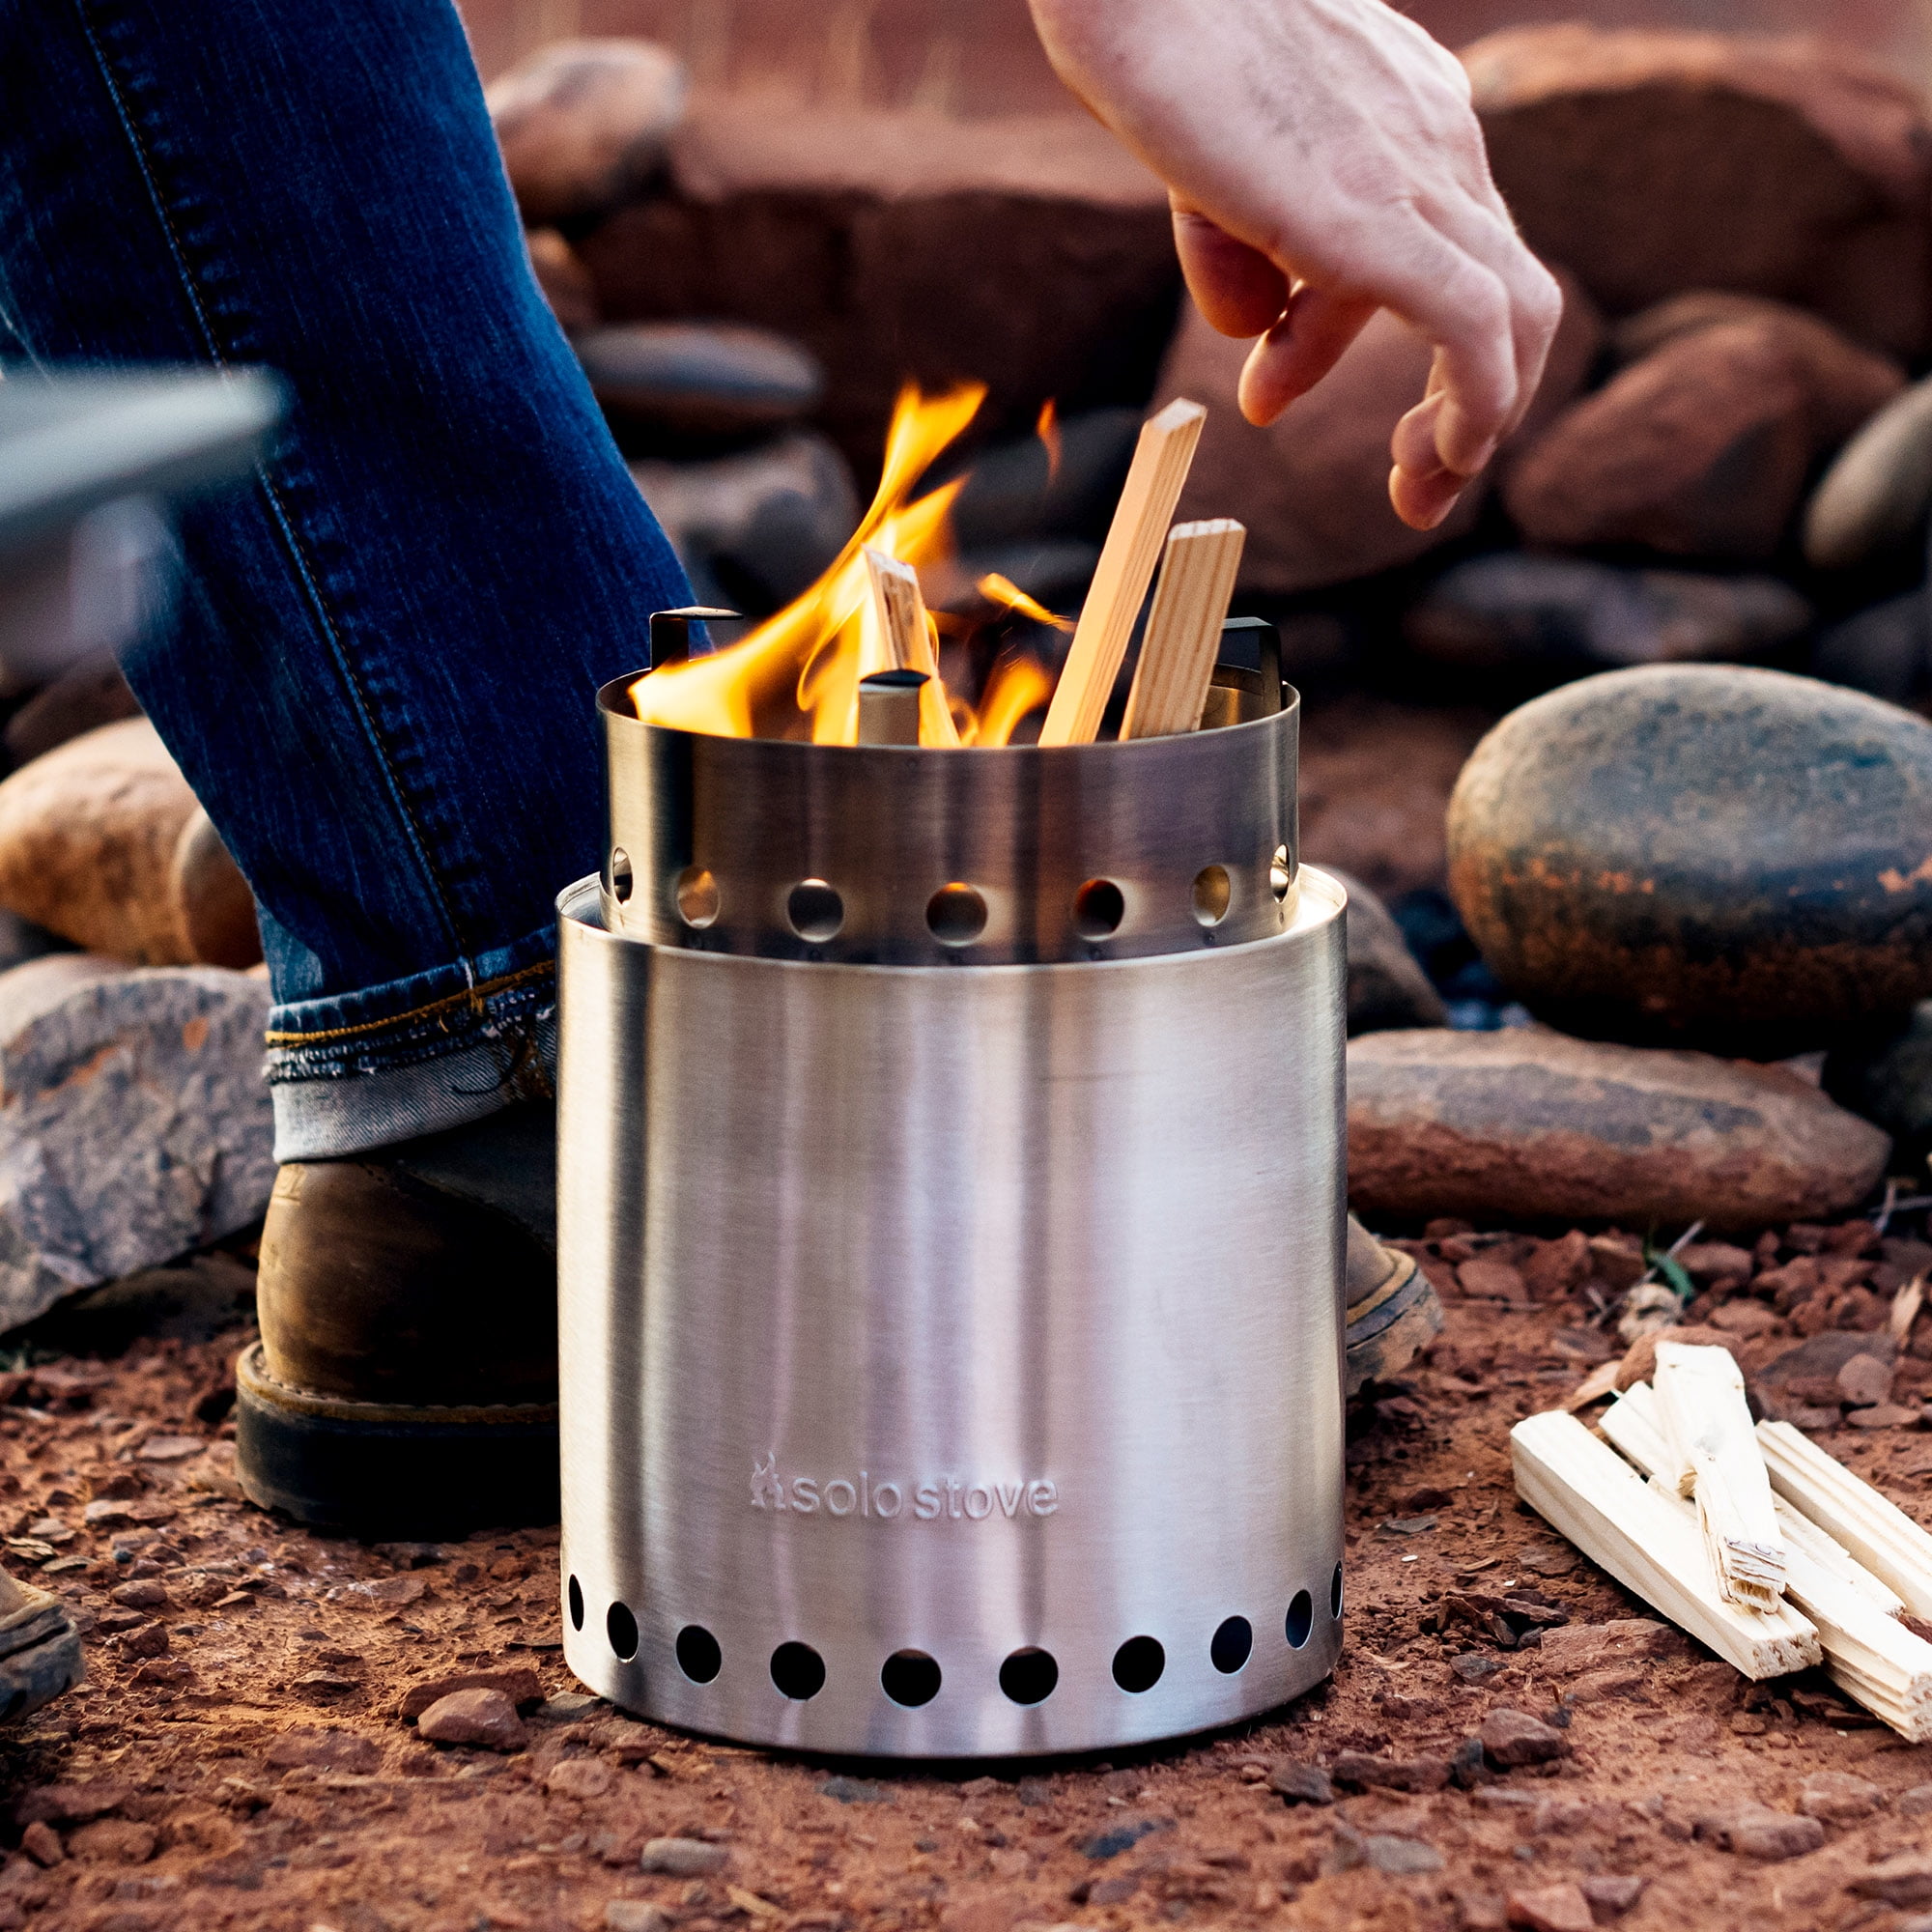 Solo Stainless Steel Stove Wood Burning Survival Backpacking Camping Cook Light 